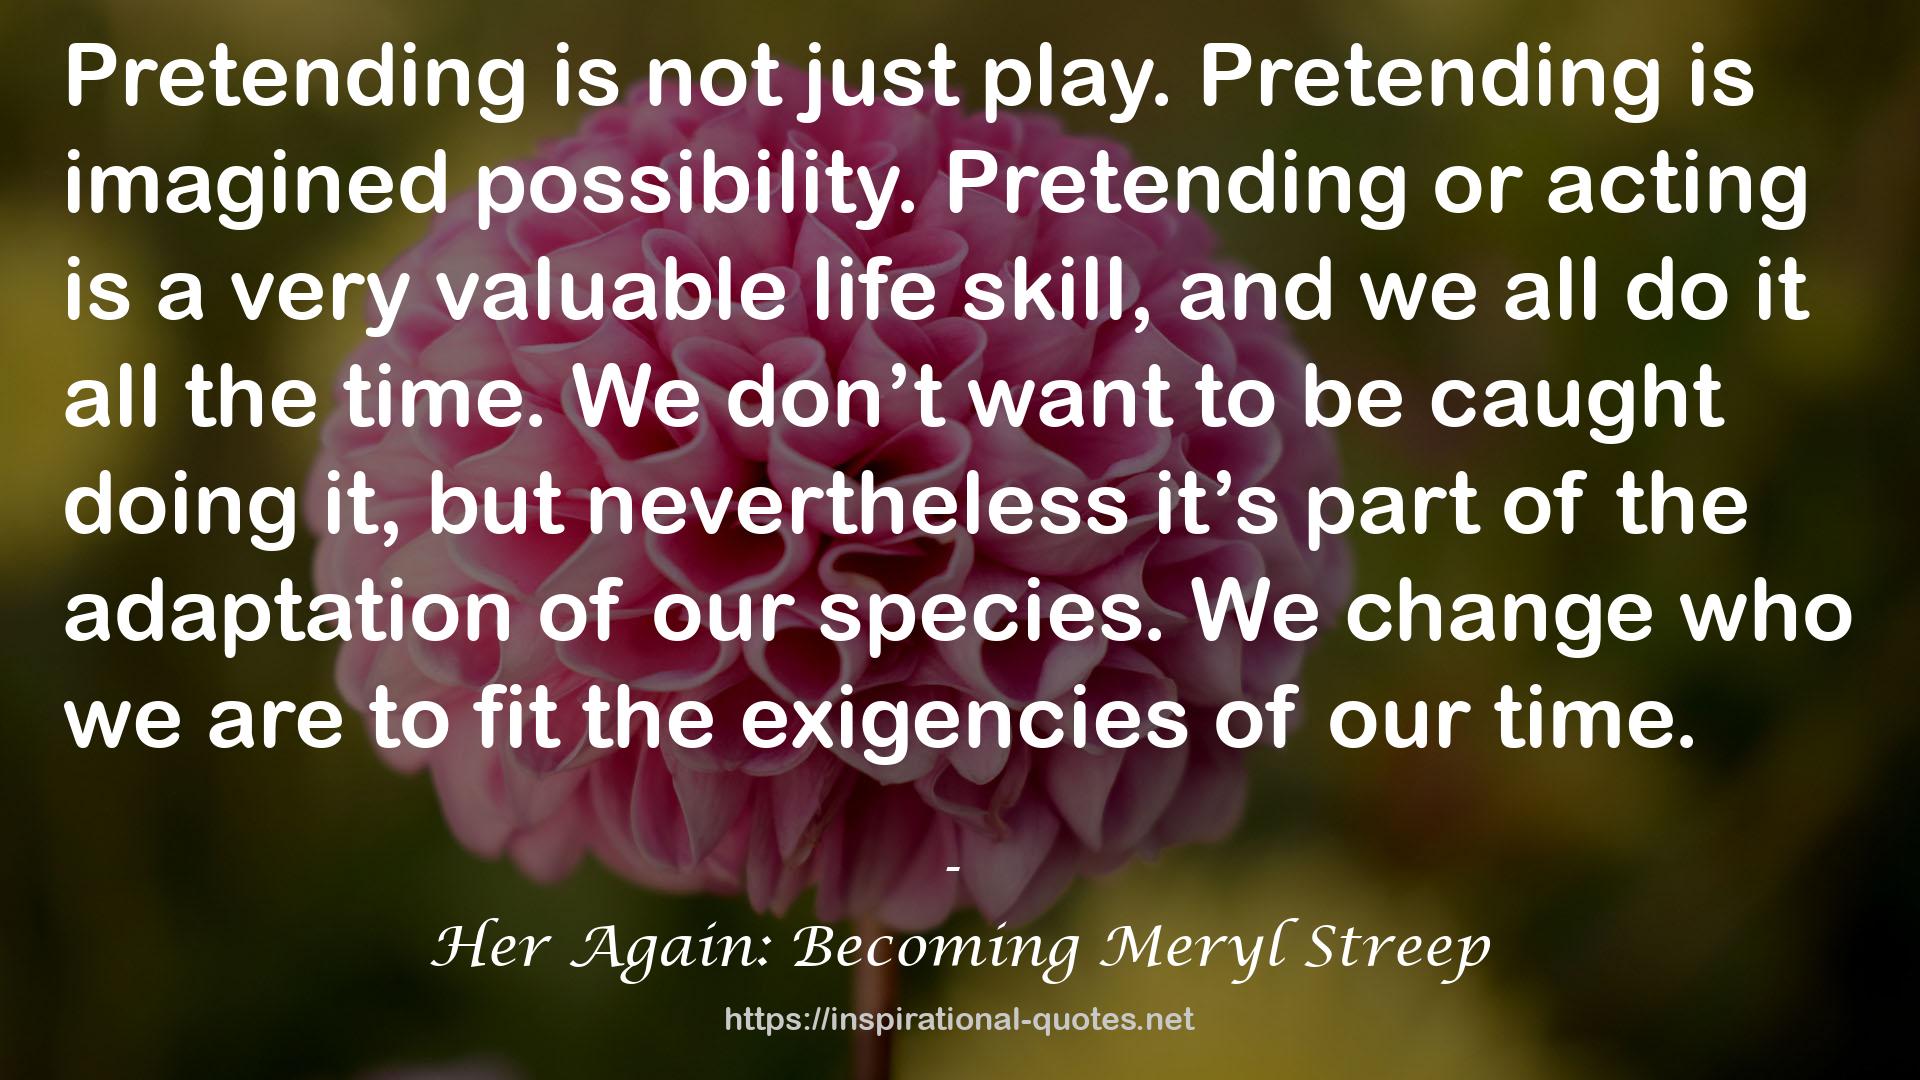 Her Again: Becoming Meryl Streep QUOTES